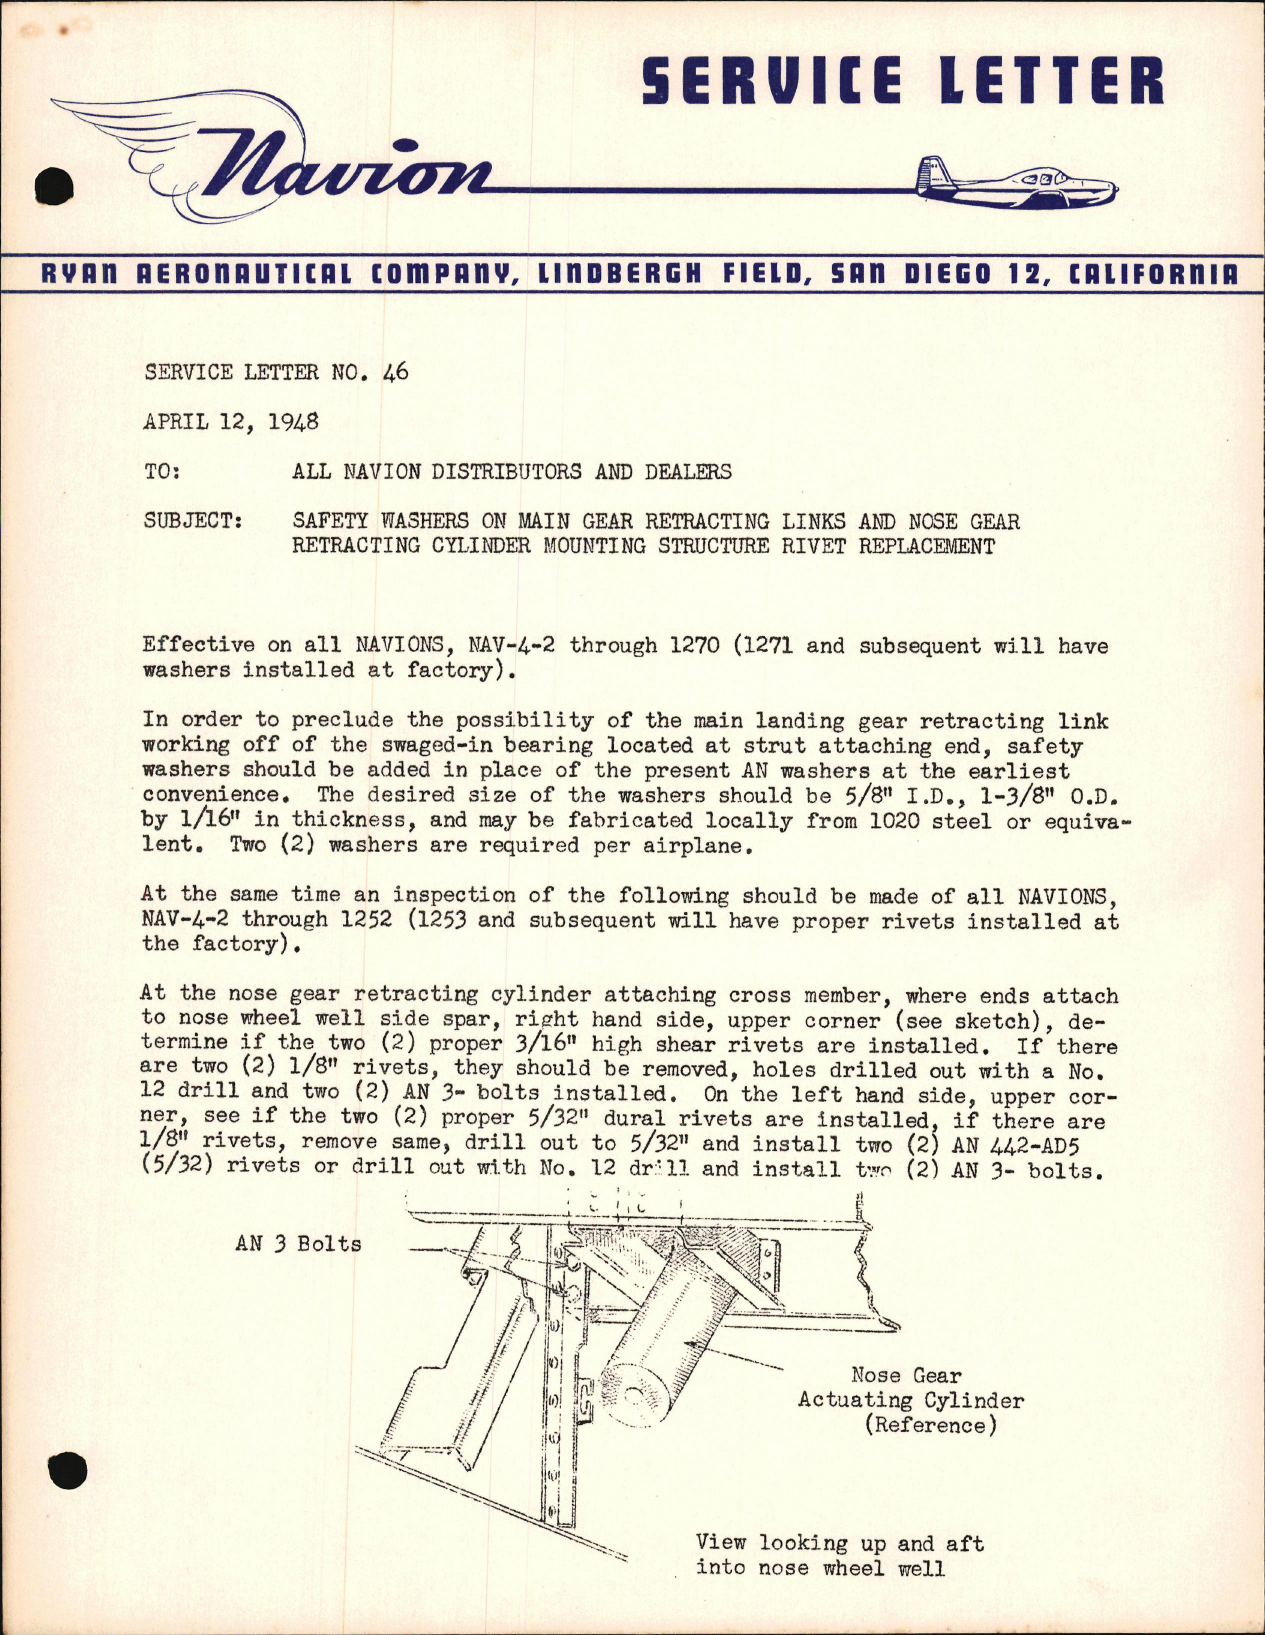 Sample page 1 from AirCorps Library document: Safety Washers on Main Gear Retracting Links and Nose Gear Retracting Cylinder Mounting Structure Rivet Replacement